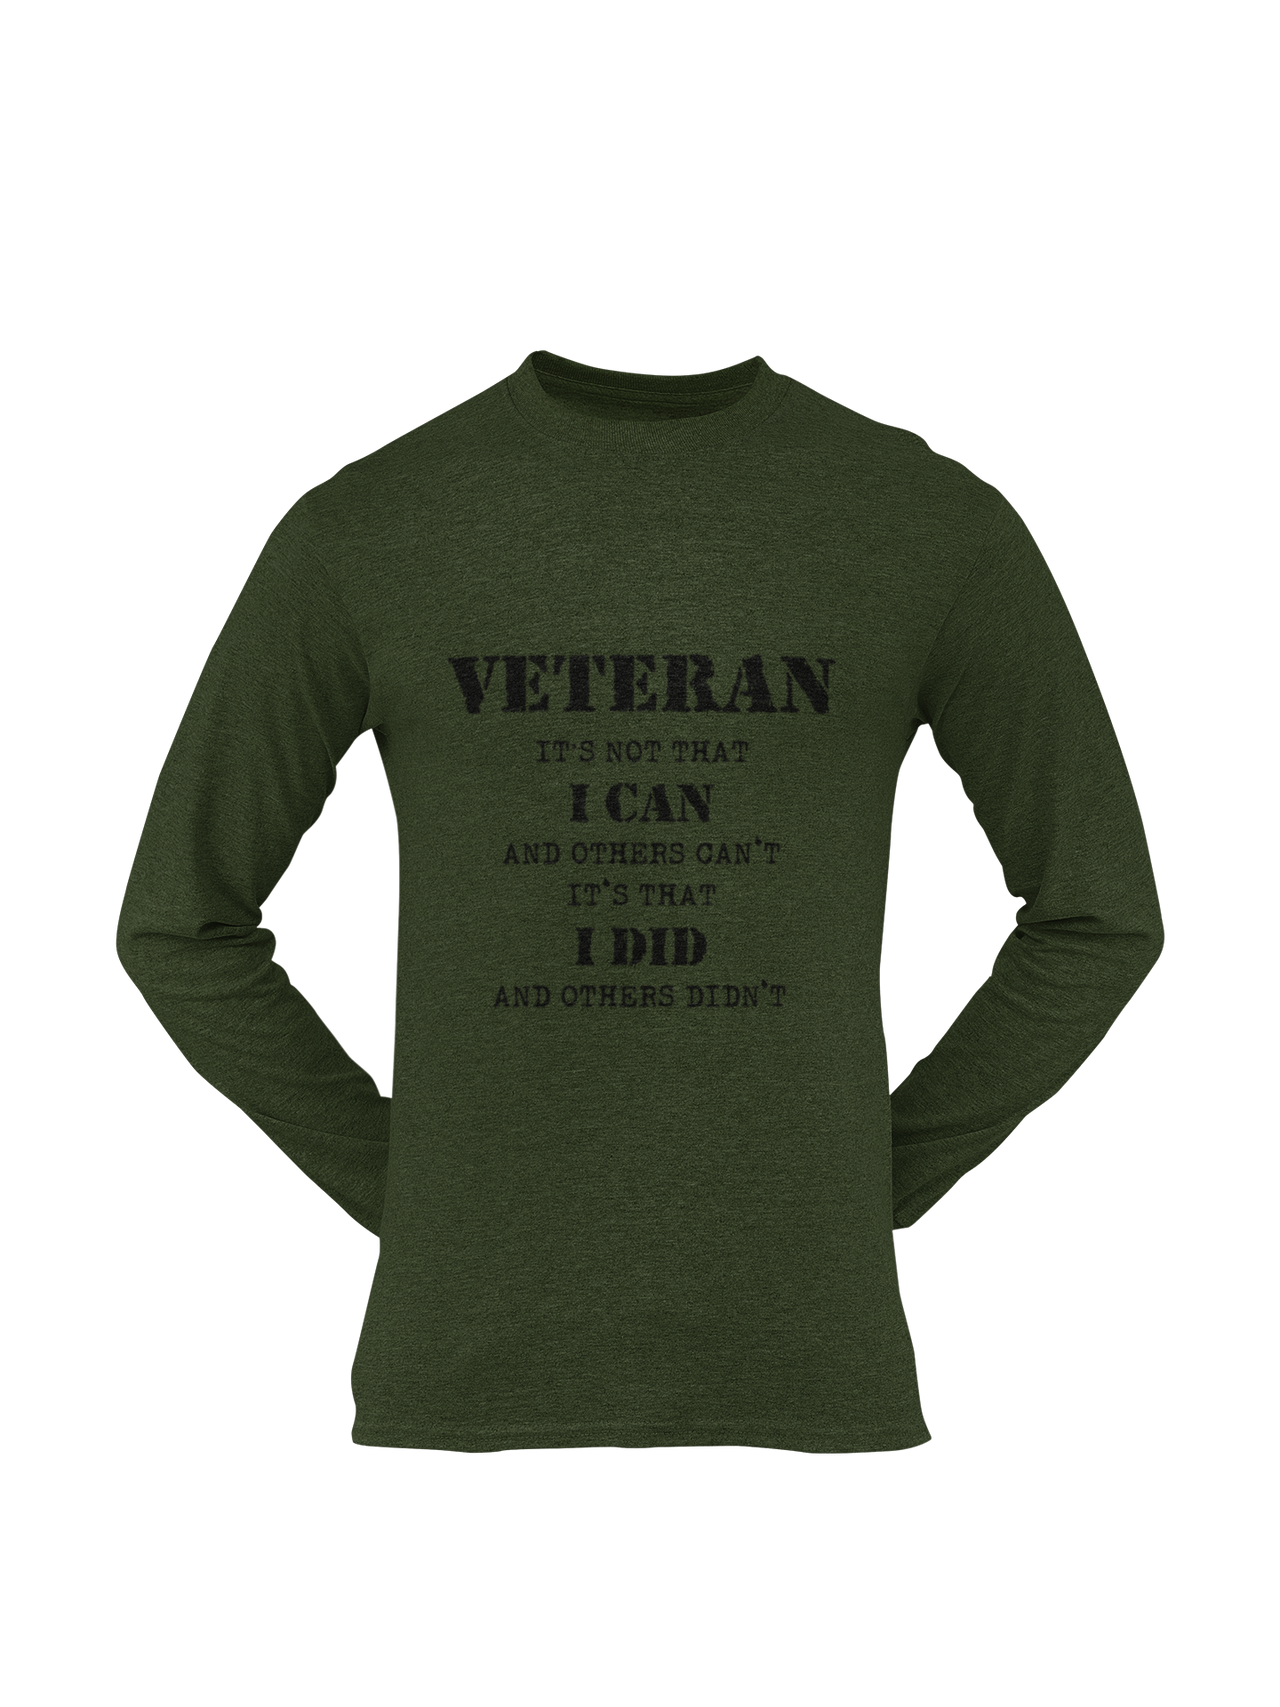 Military T-shirt - Veteran, It's Not That I Can and Others Can't..... (Men)